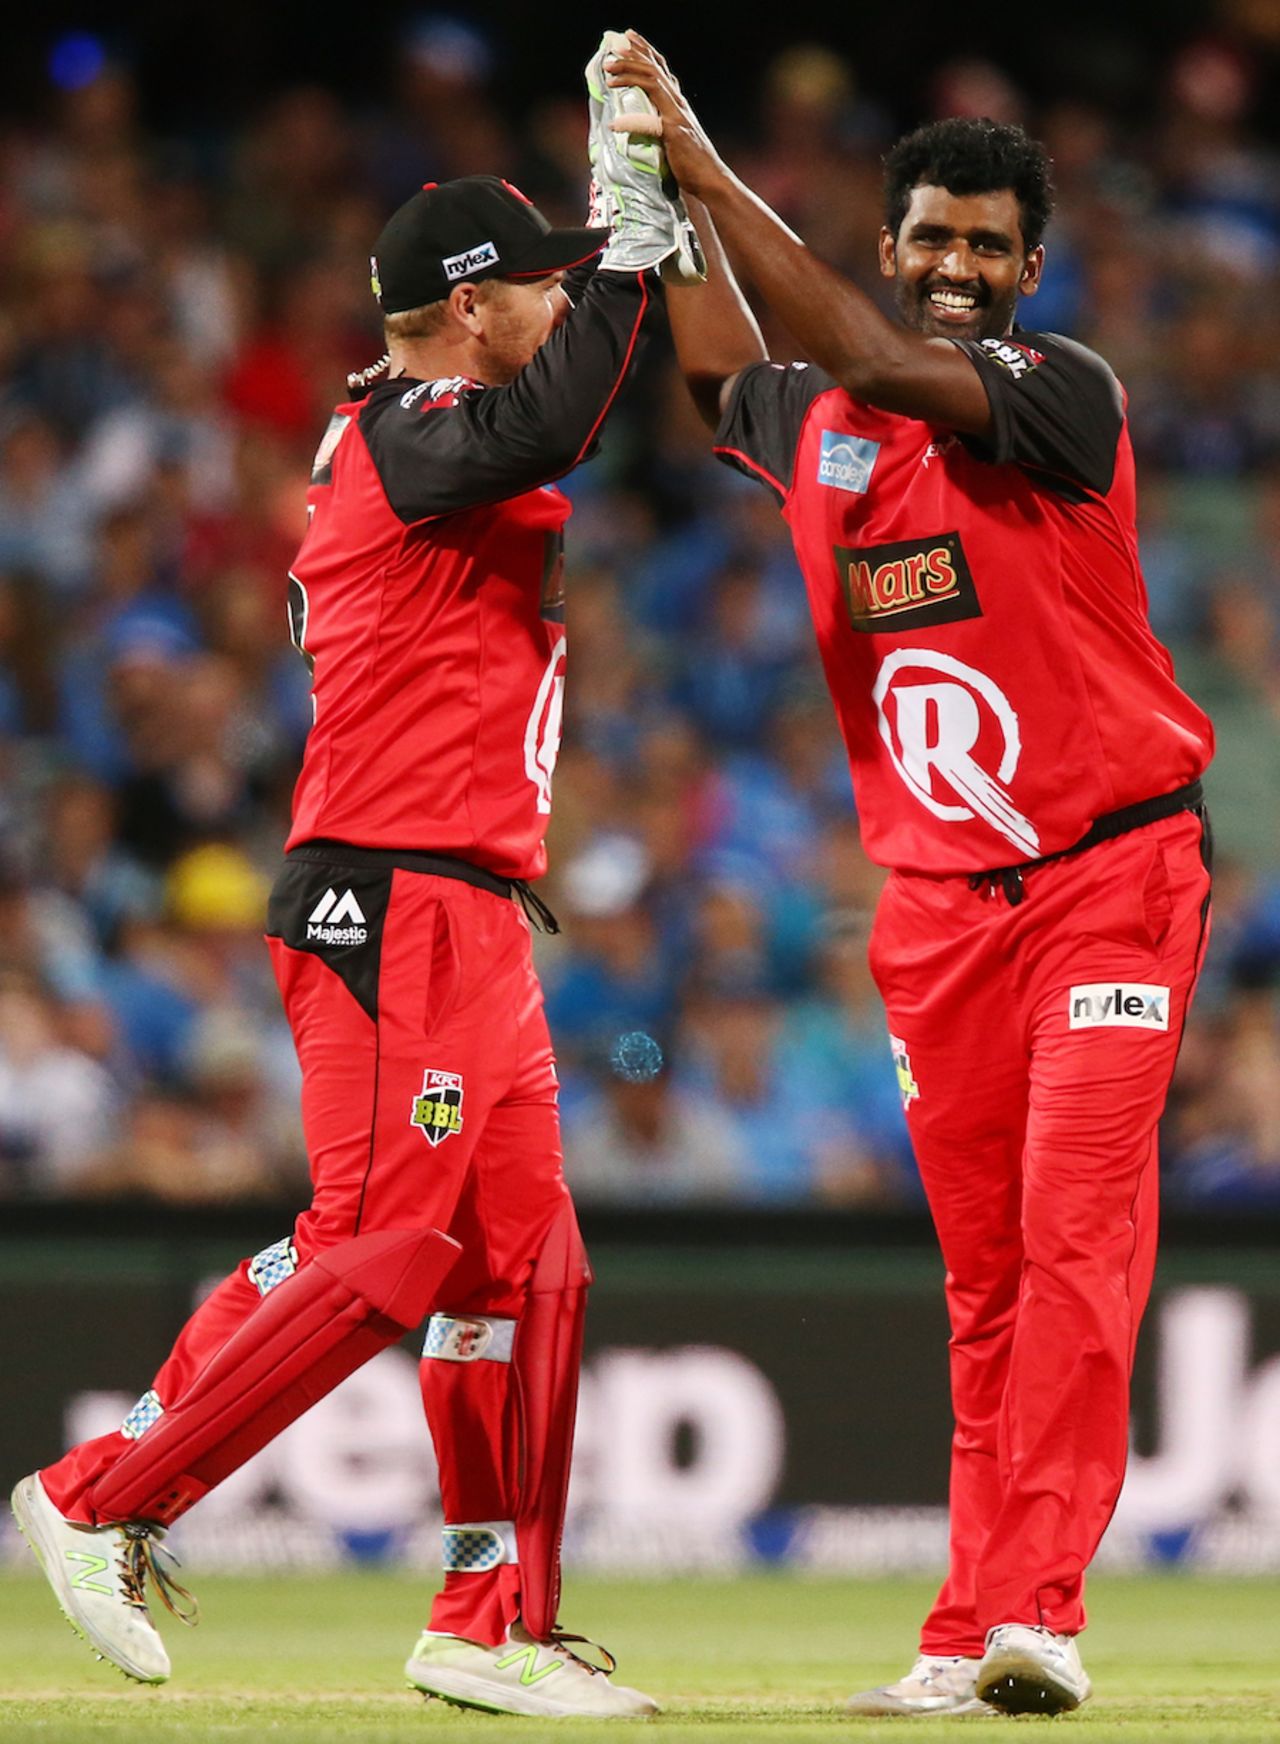 Thisara Perera celebrates one of his four wickets, Adelaide Strikers v Melbourne Renegades, BBL 2016-17, Adelaide, January 16, 2017